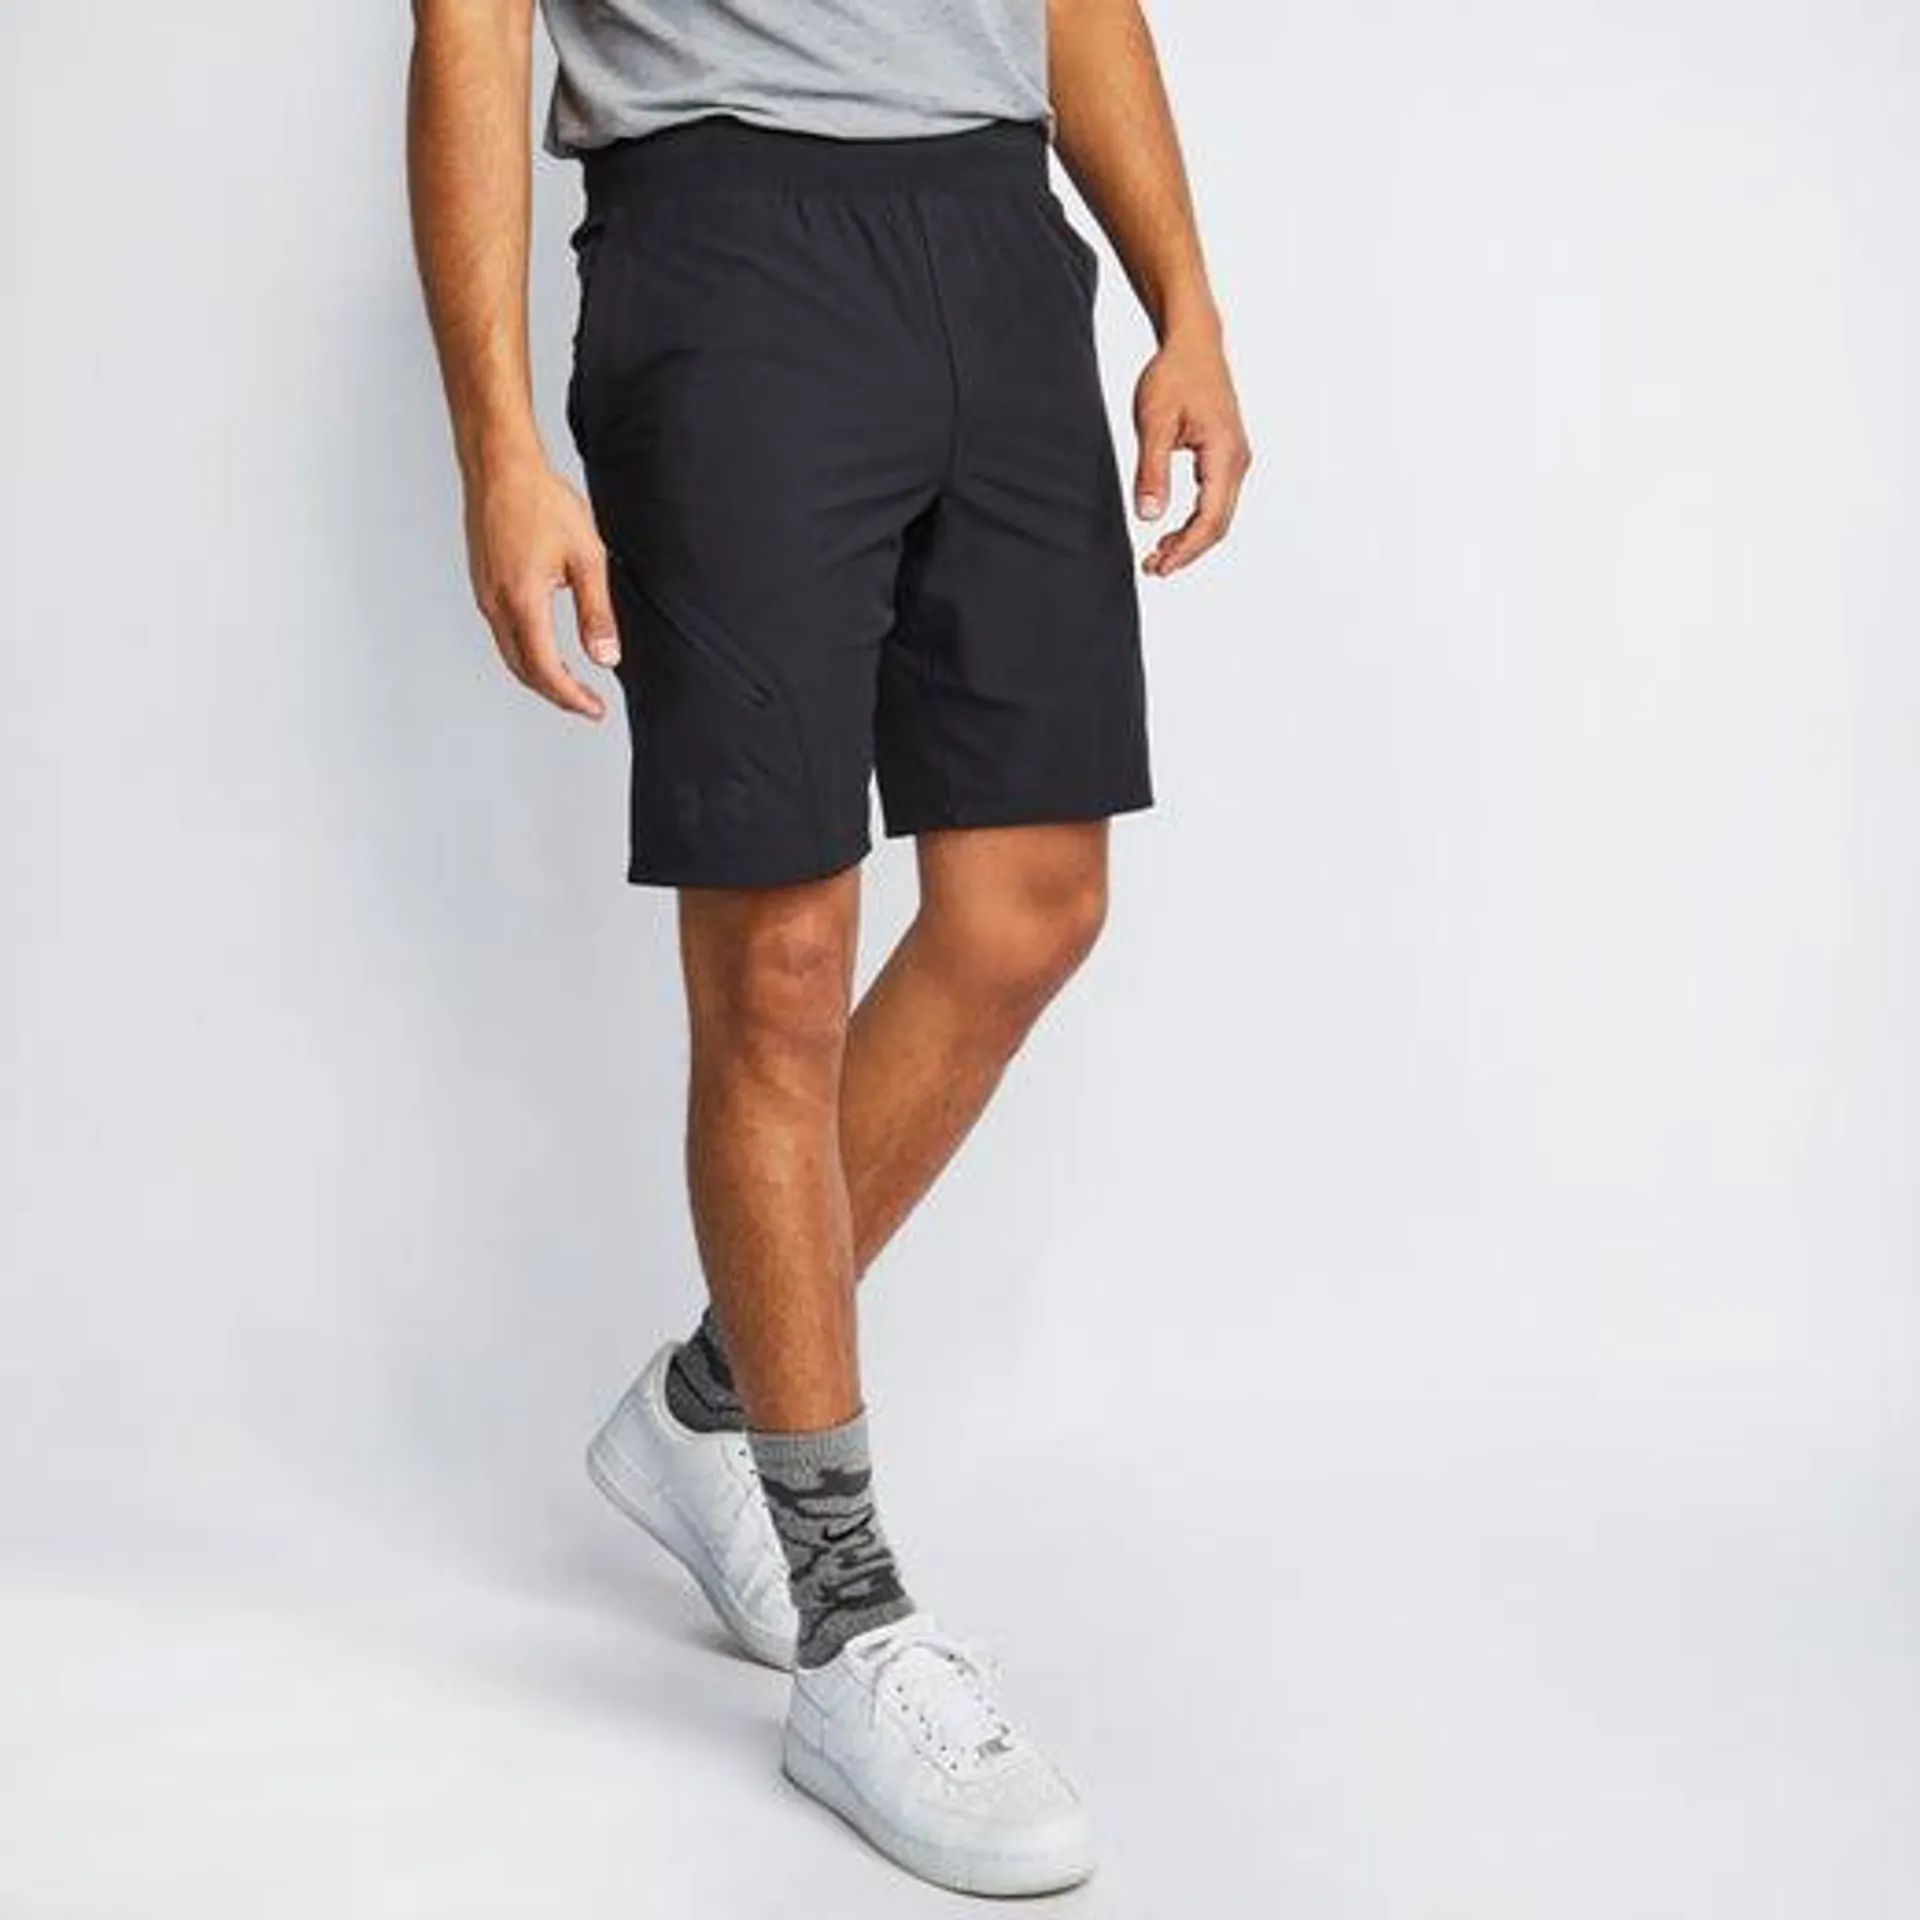 Under Armour Unstoppable Cargo Basketball Short